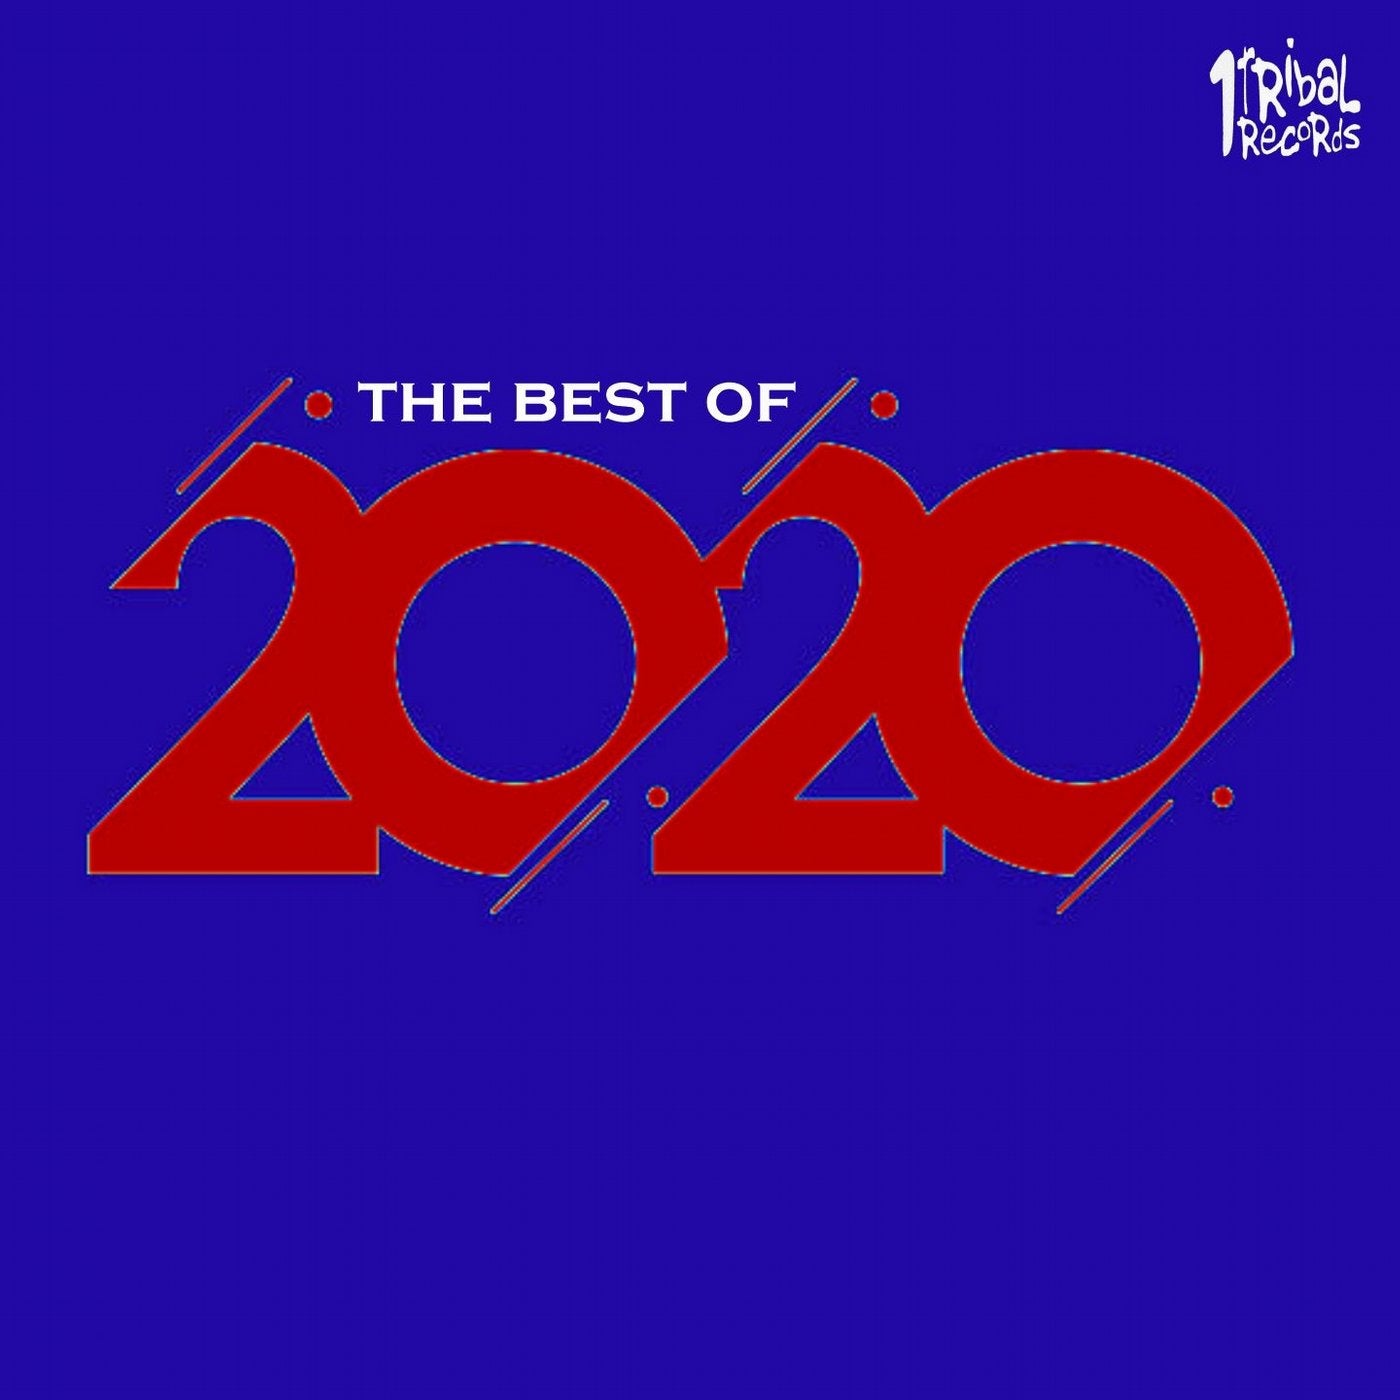 The Best Of 2020